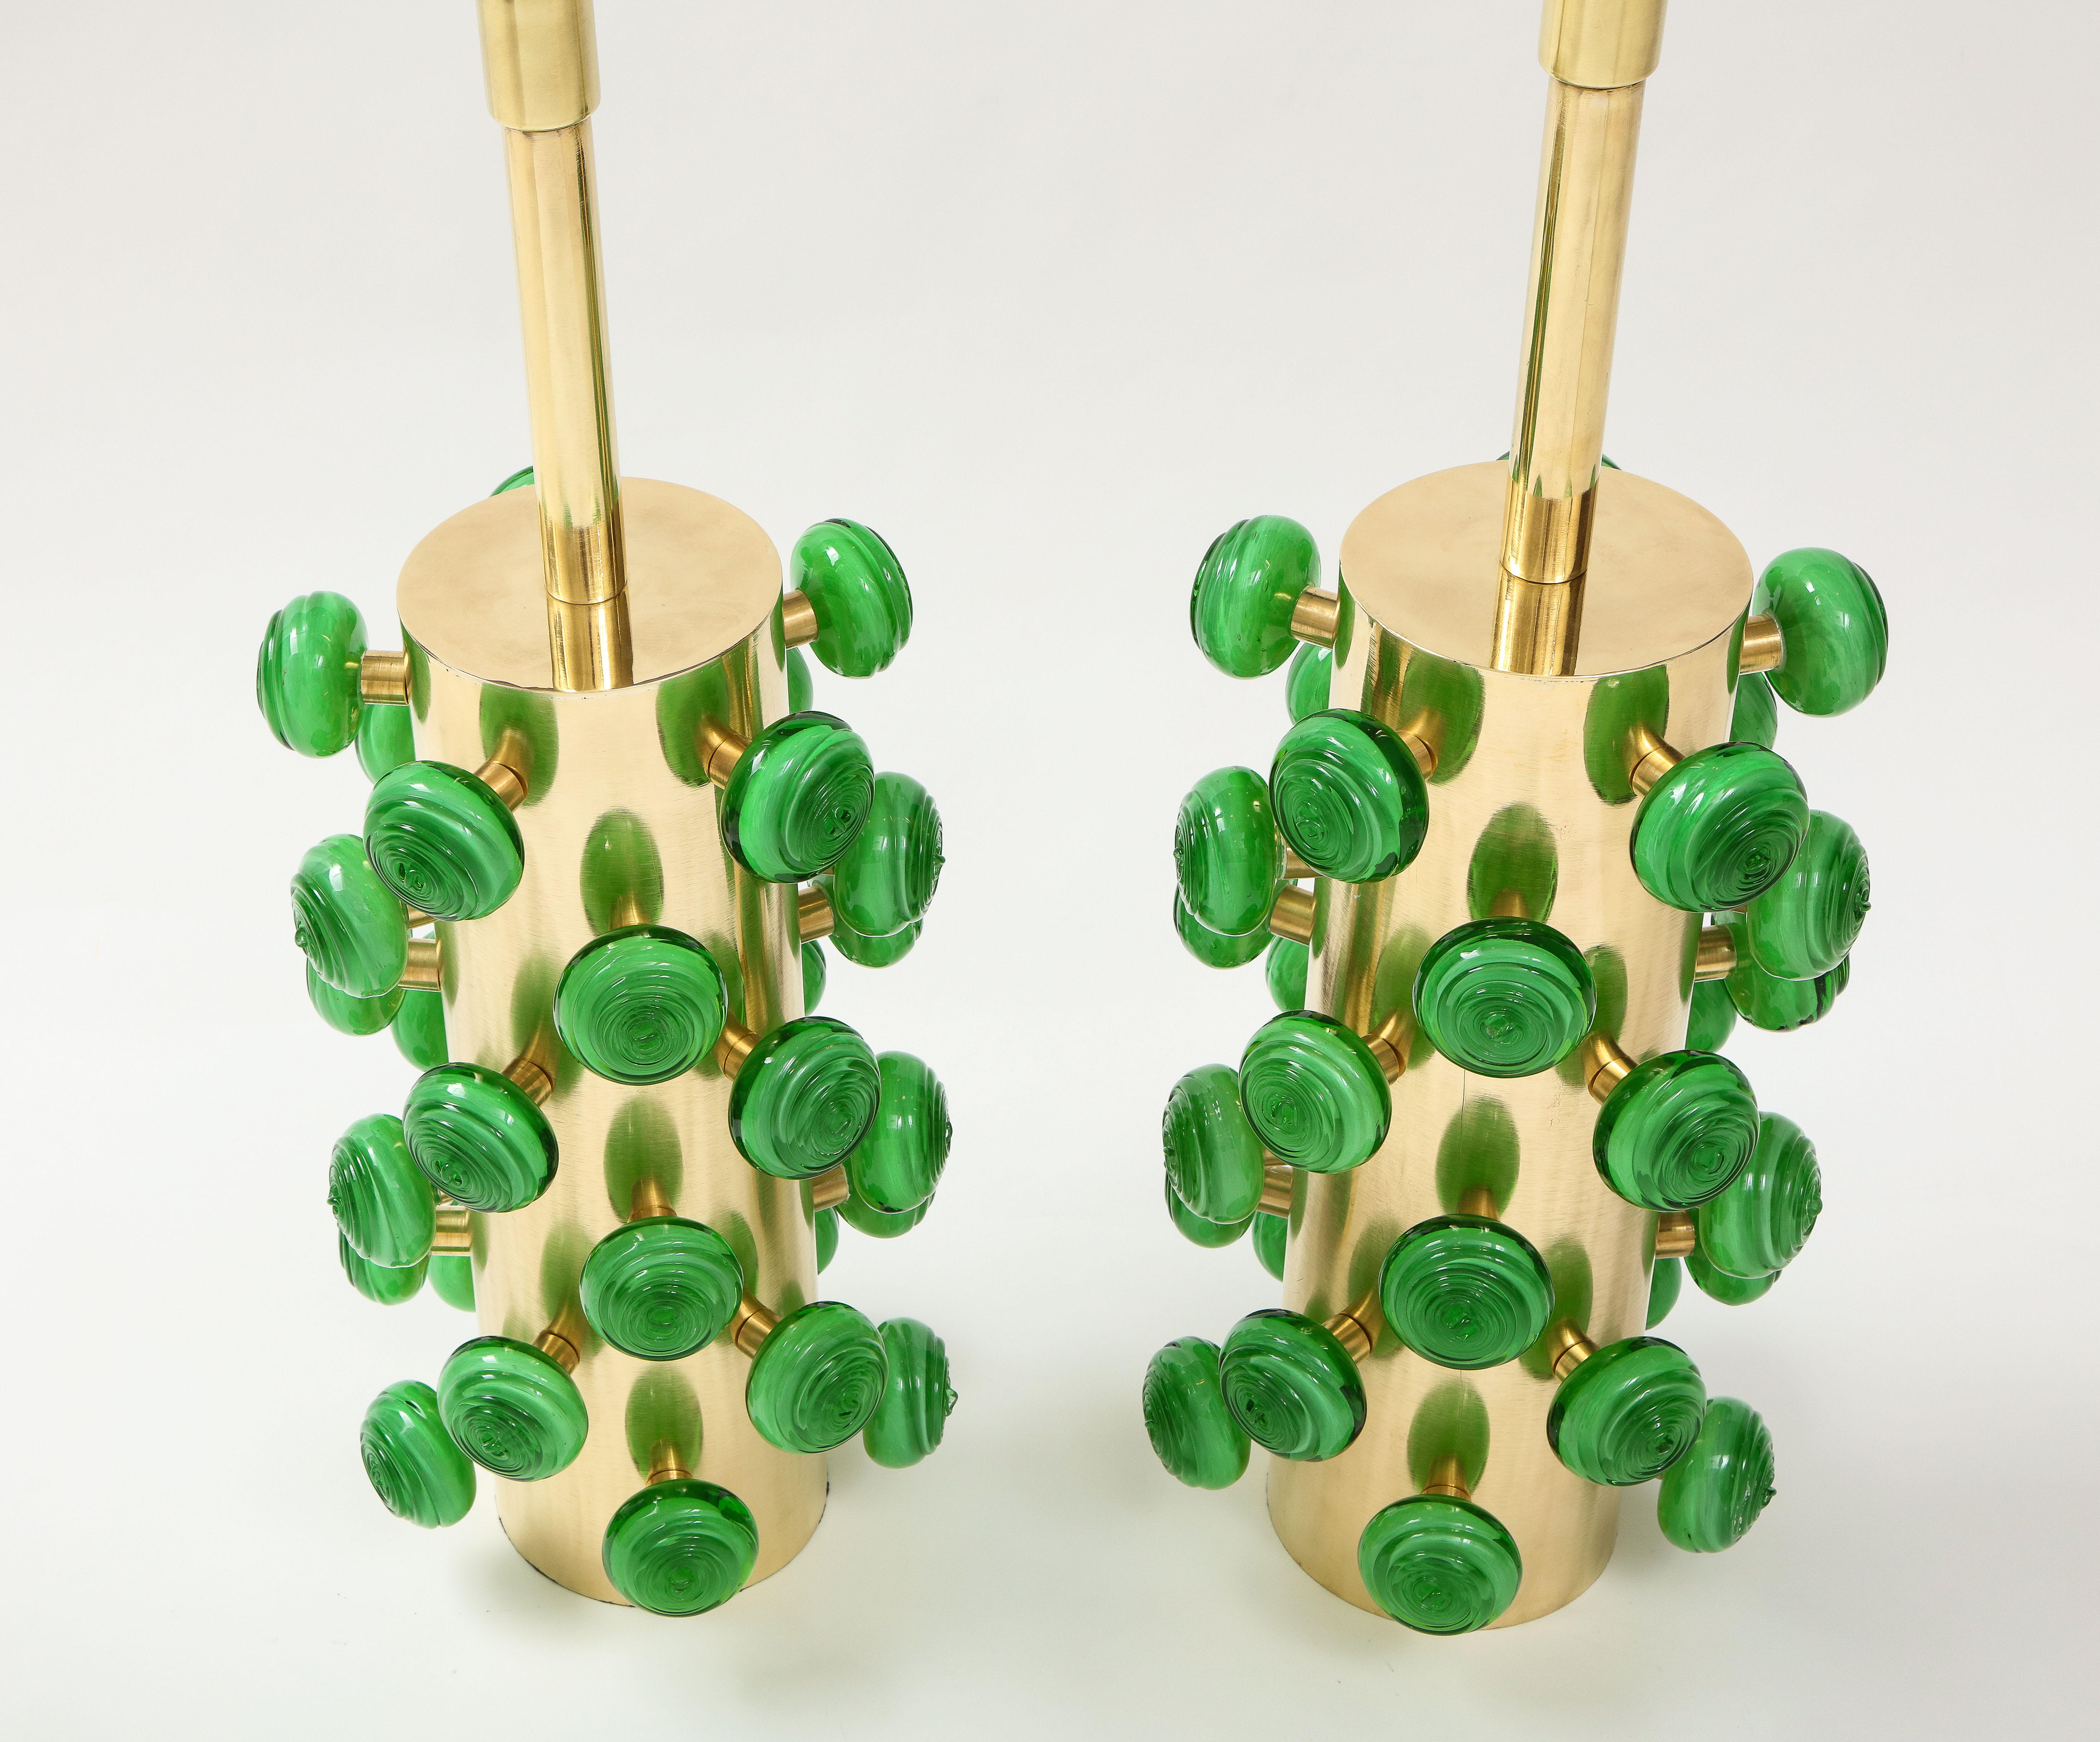 Hand-Crafted Pair of Green Murano Glass Knobs and Brass Cylinder Sculptural Lamps, Italy 2021